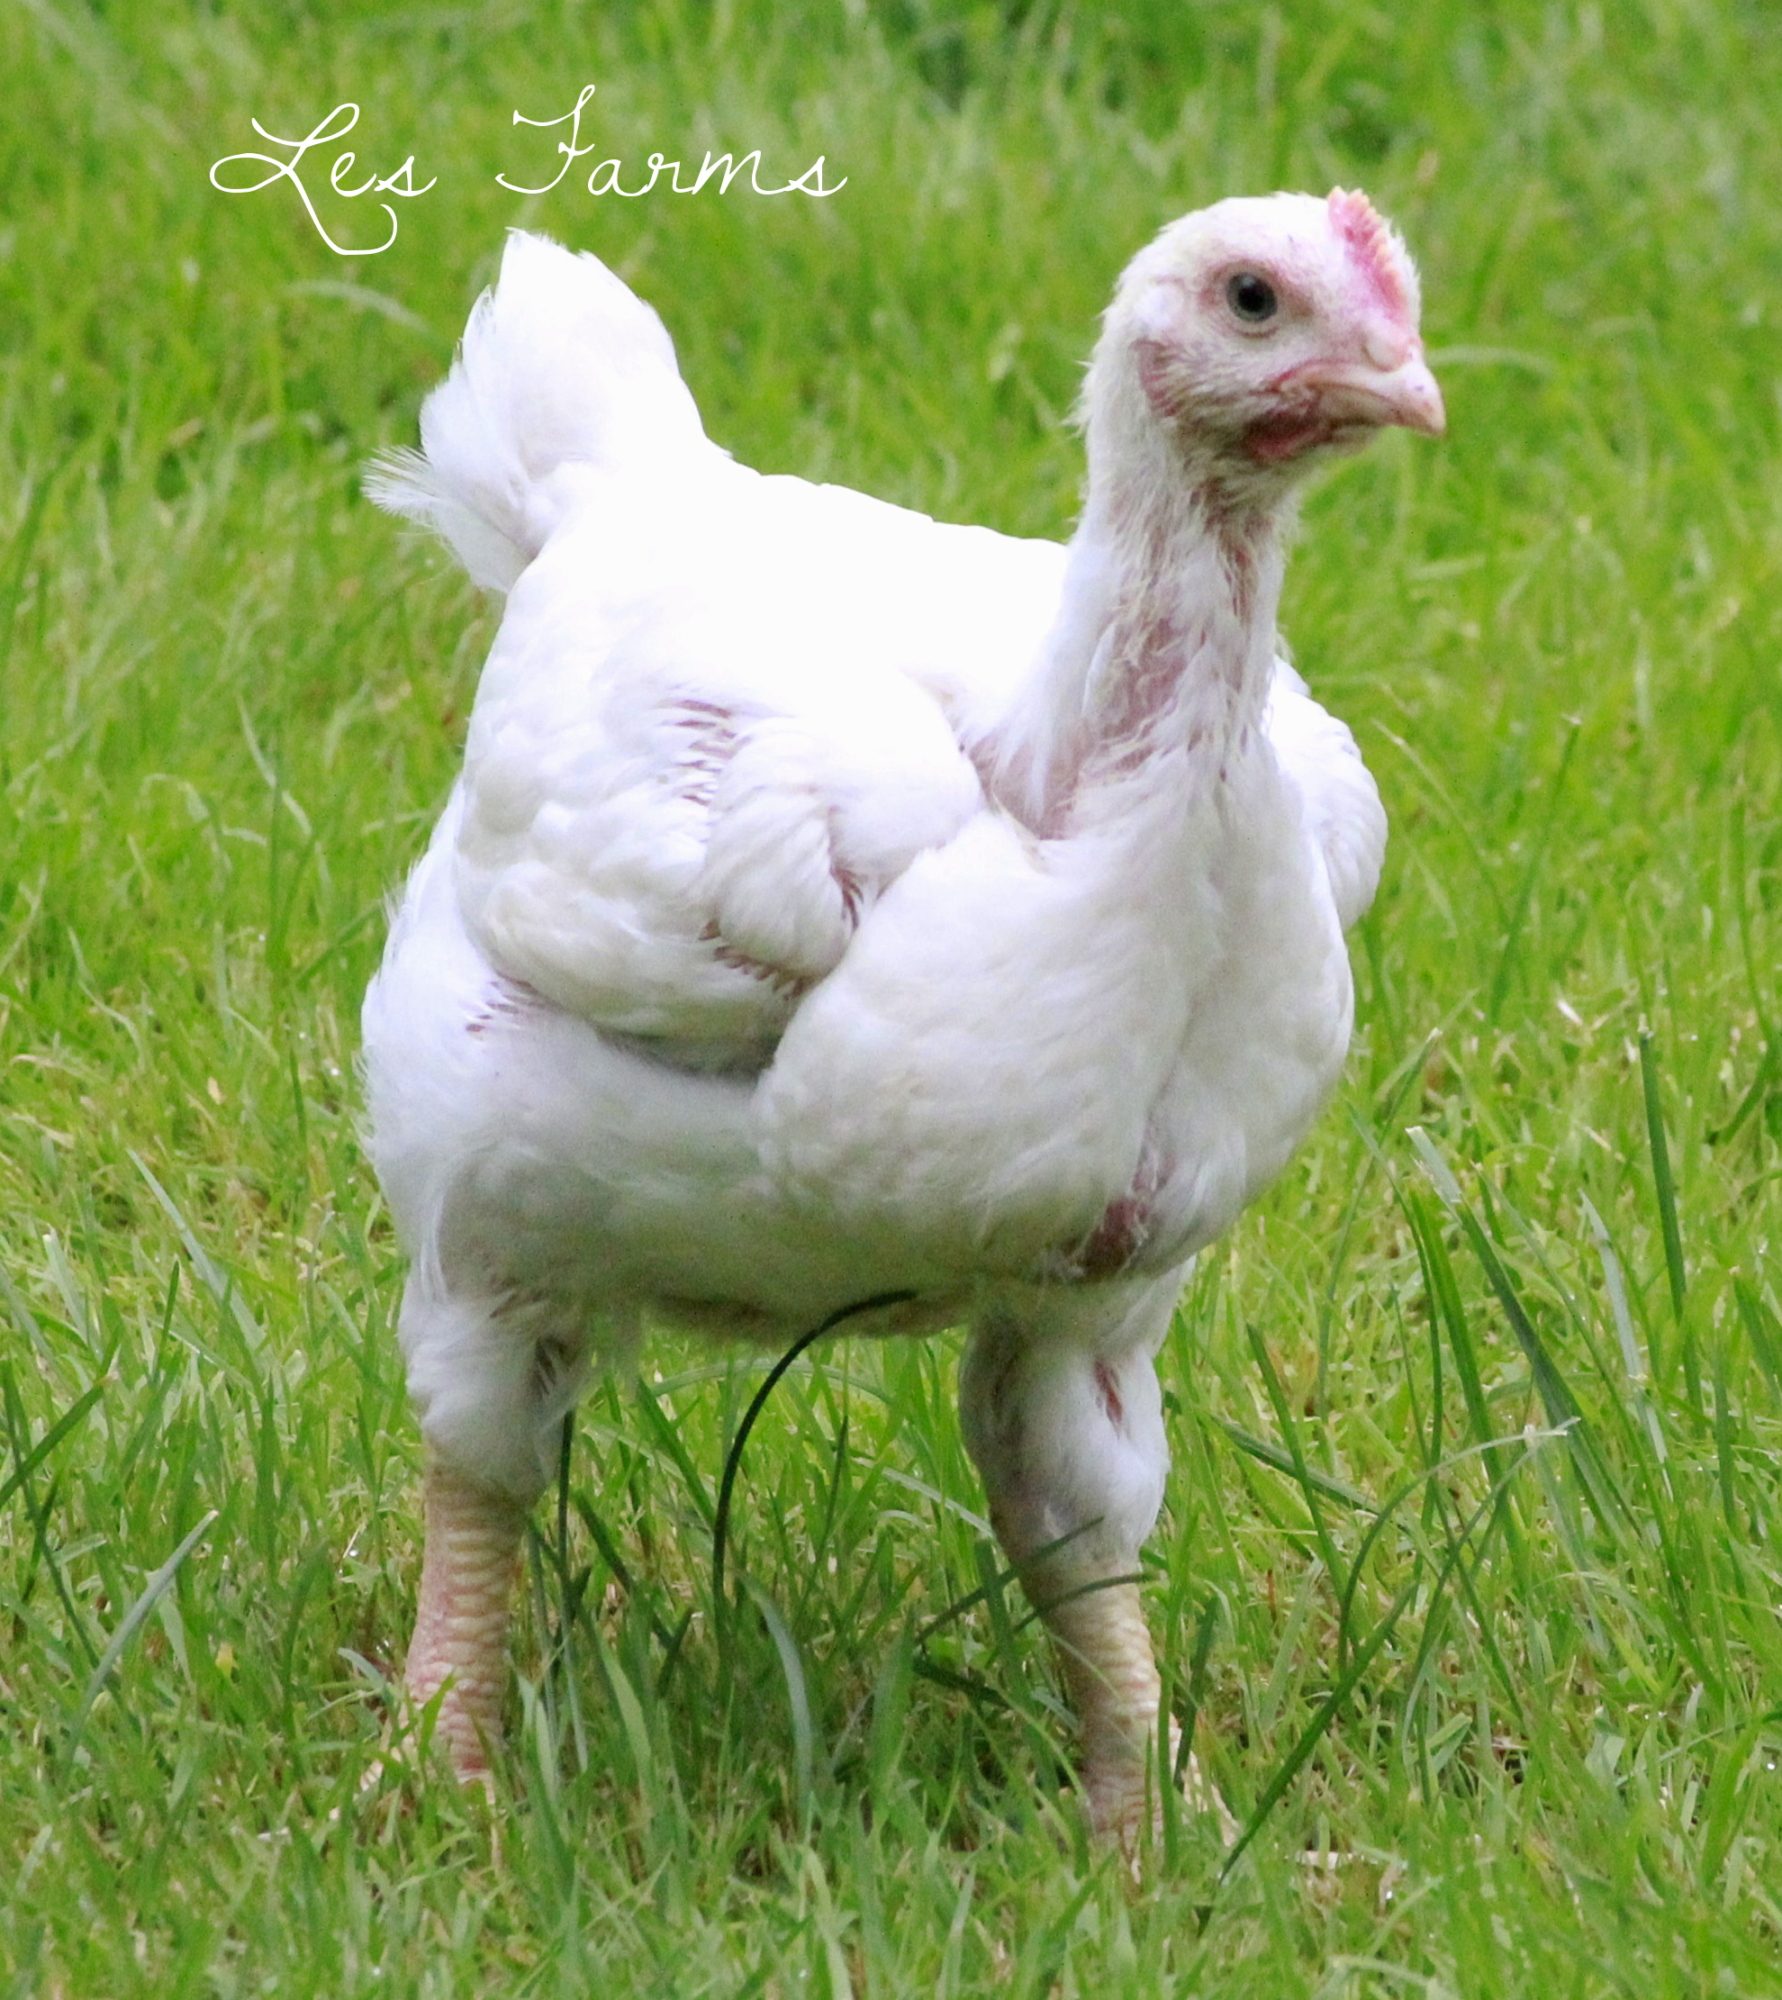 Raising Cornish X for Meat – The TRUTH - BackYard Chickens ...